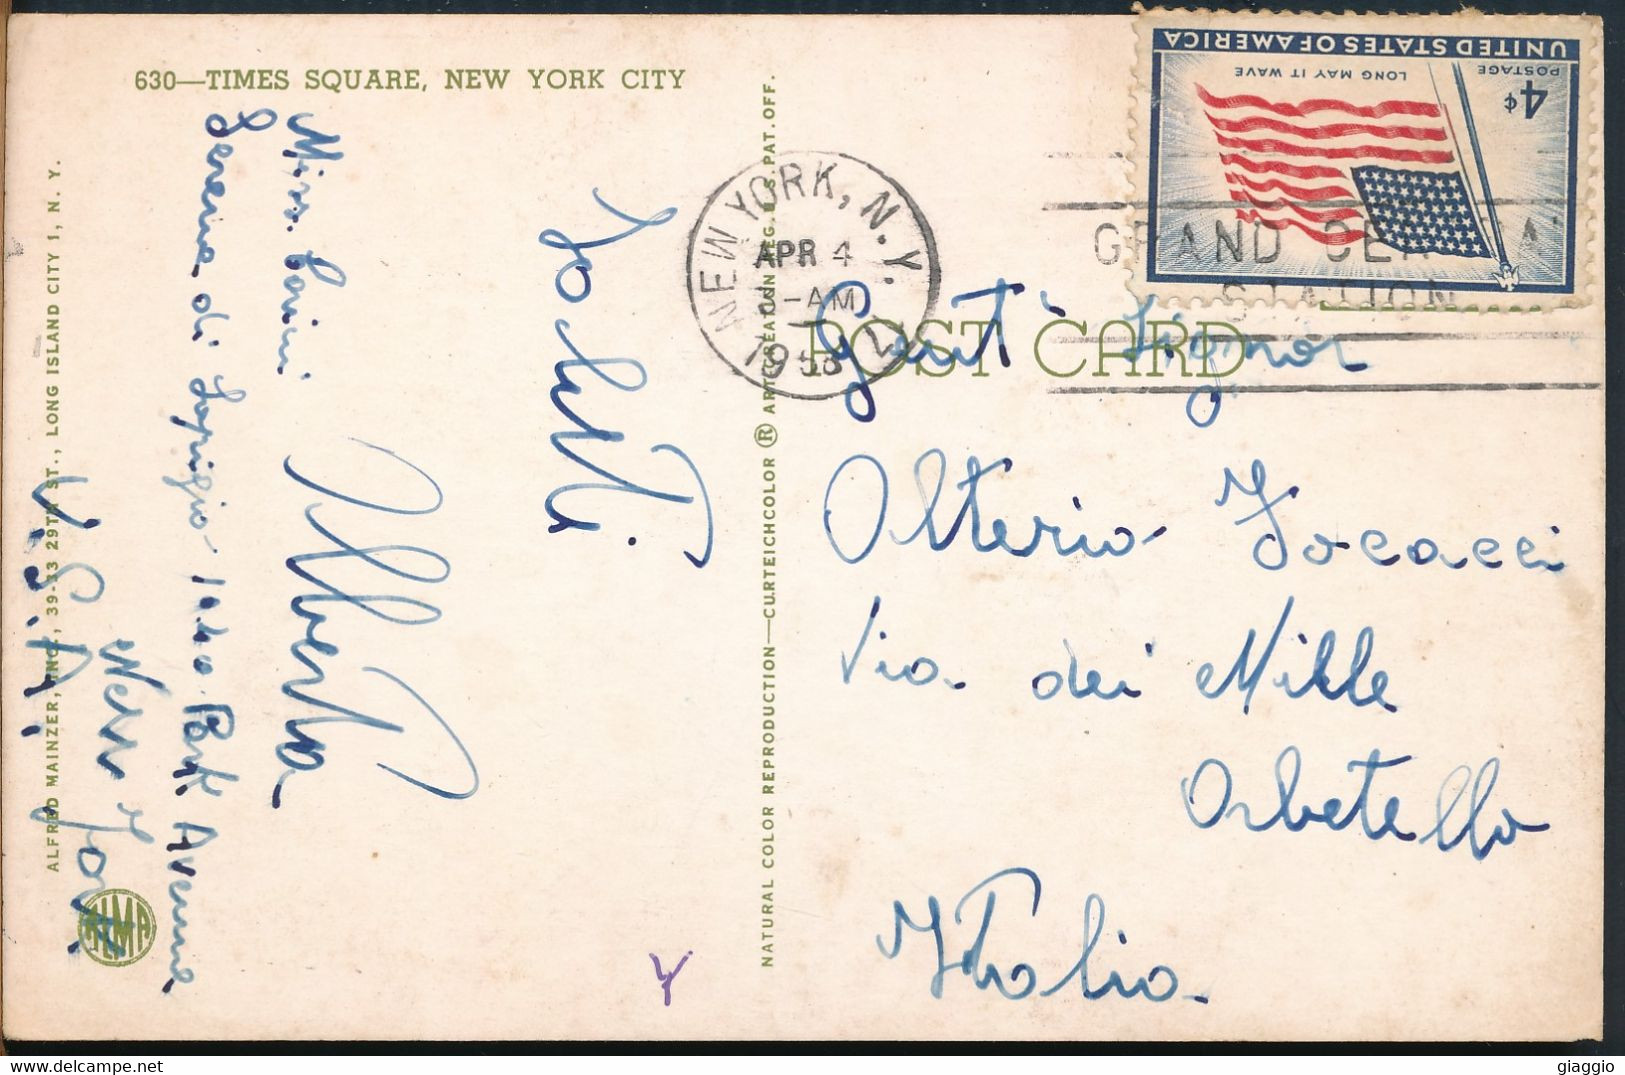 °°° 25612 - USA - NY - NEW YORK - TIMES SQUARE - 1968 With Stamps °°° - Time Square